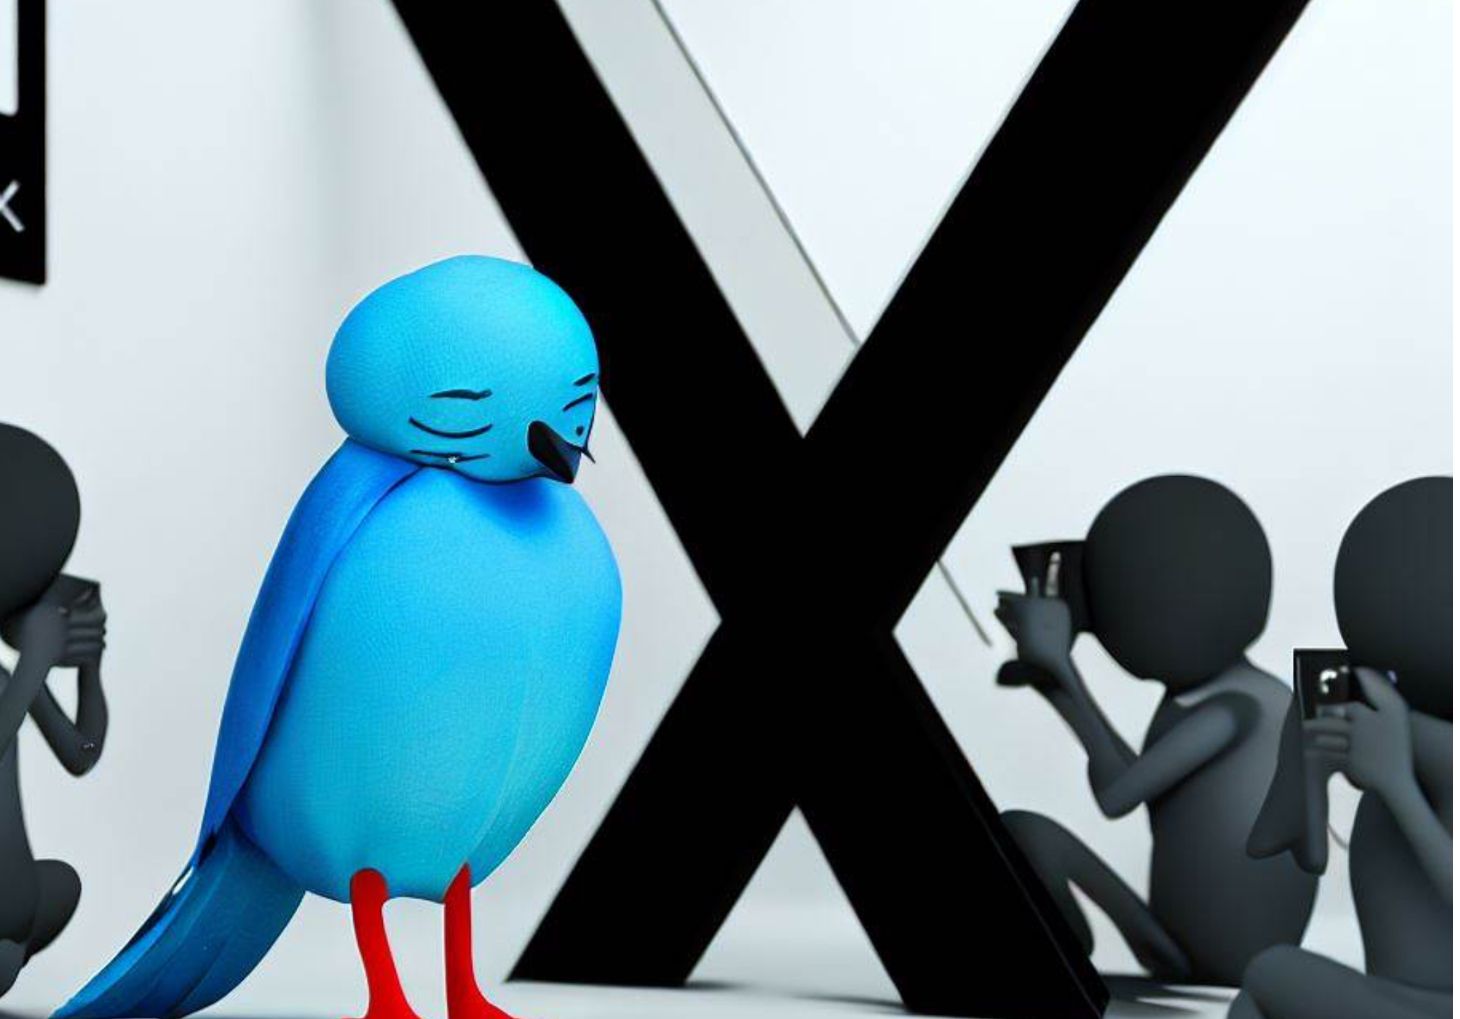 Users clicking photos of a large X while a bird looks sadly 